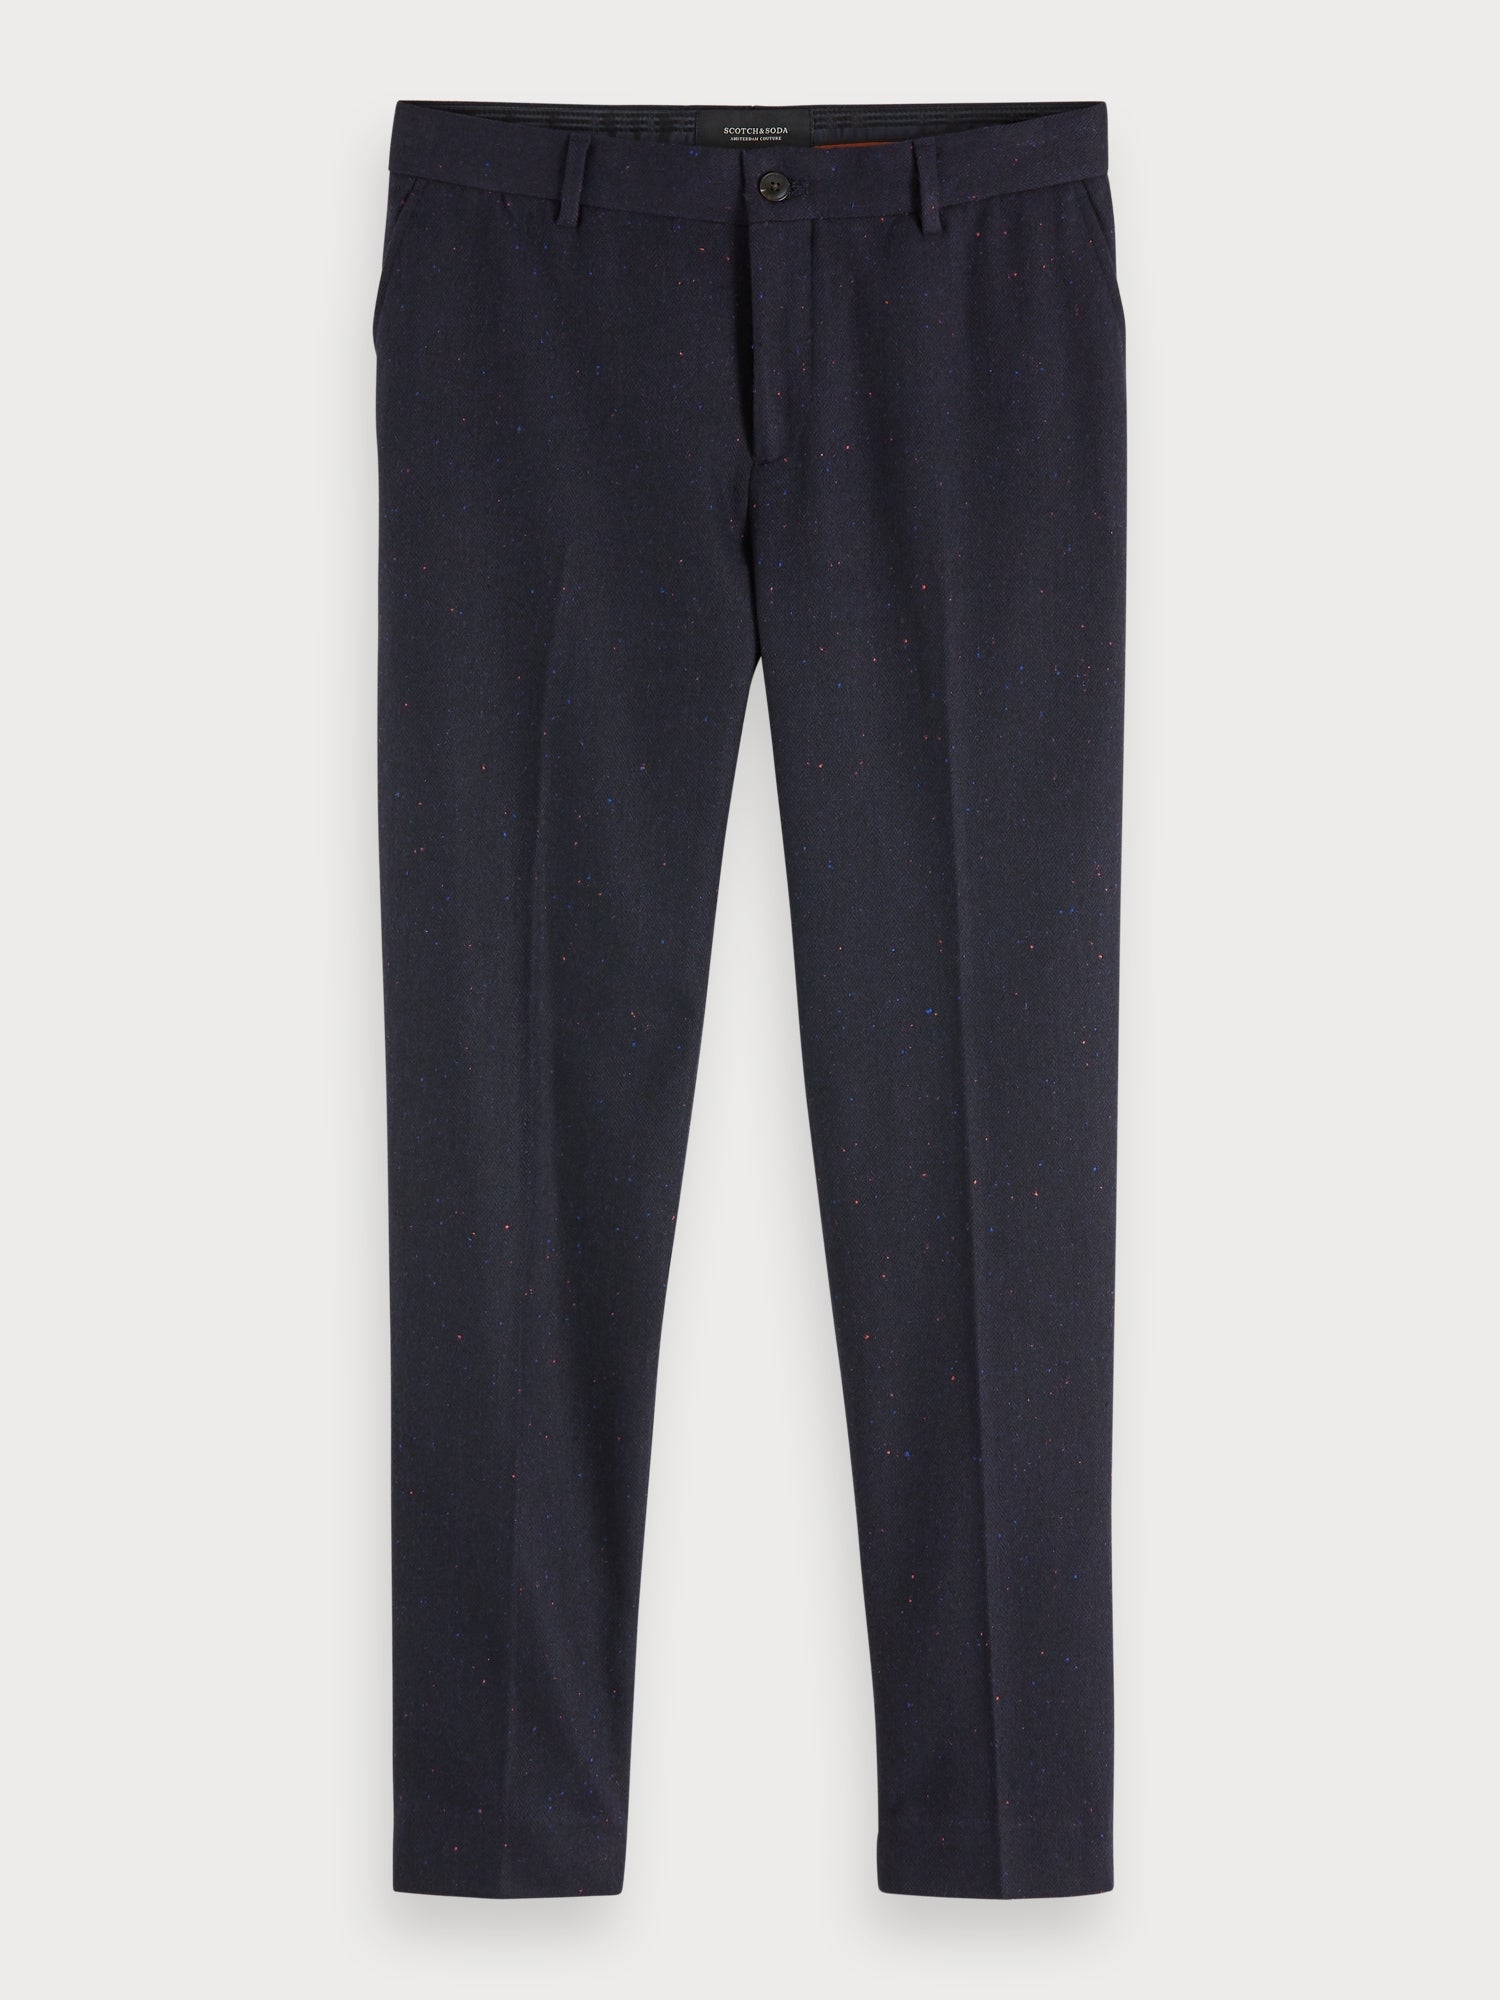 Buy Arrow Check Pattern Weave Wool Blend Trousers - NNNOW.com